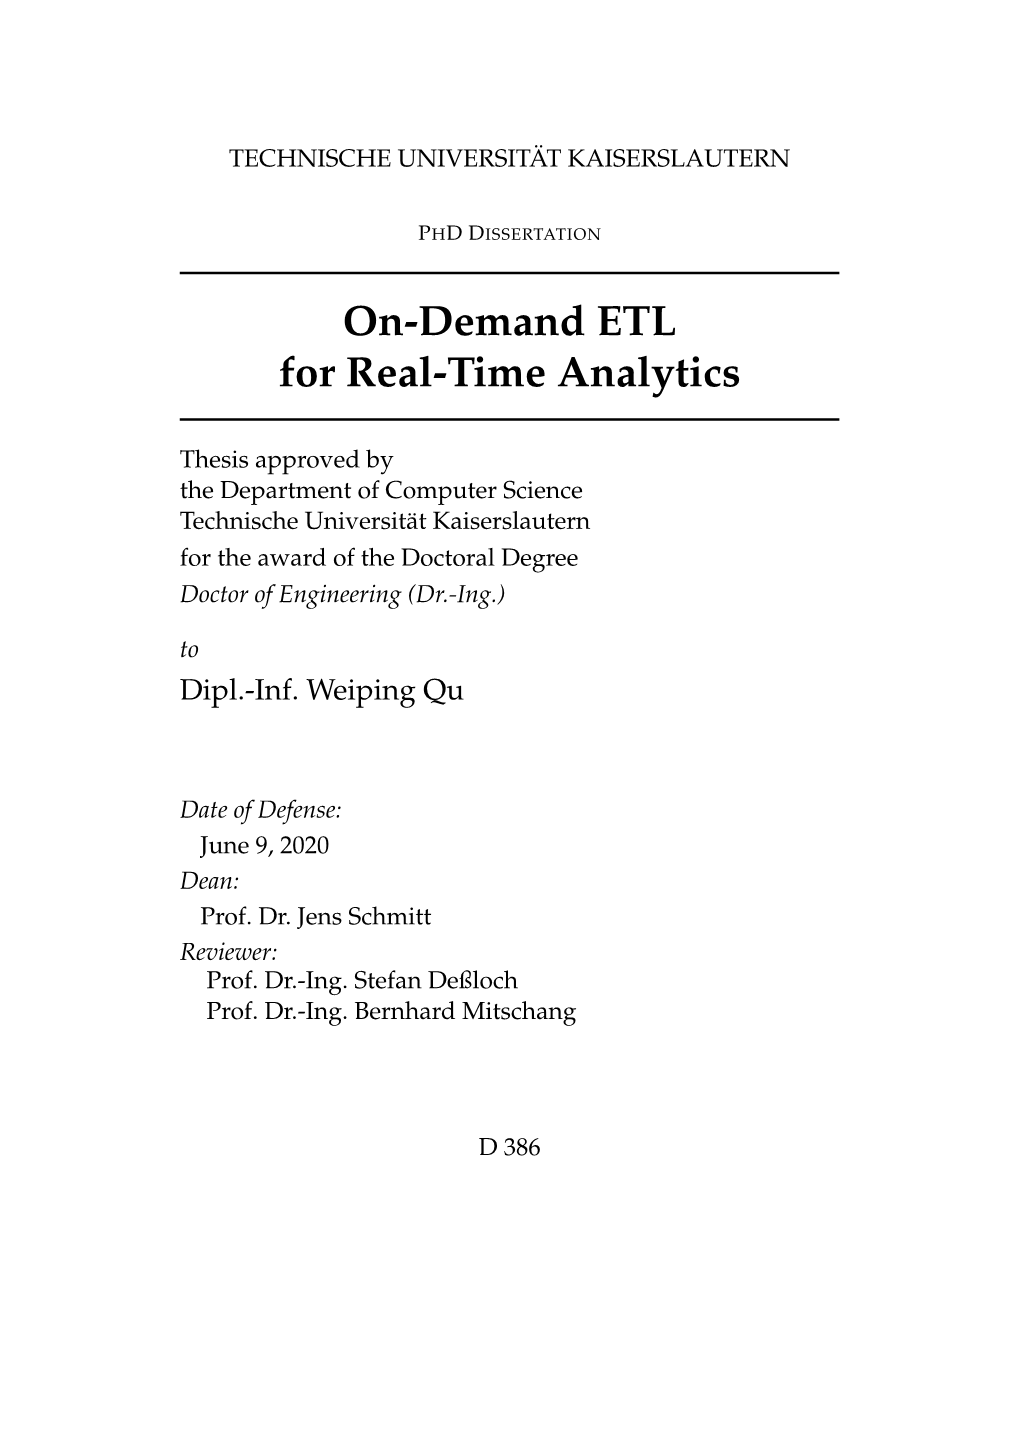 On-Demand ETL for Real-Time Analytics